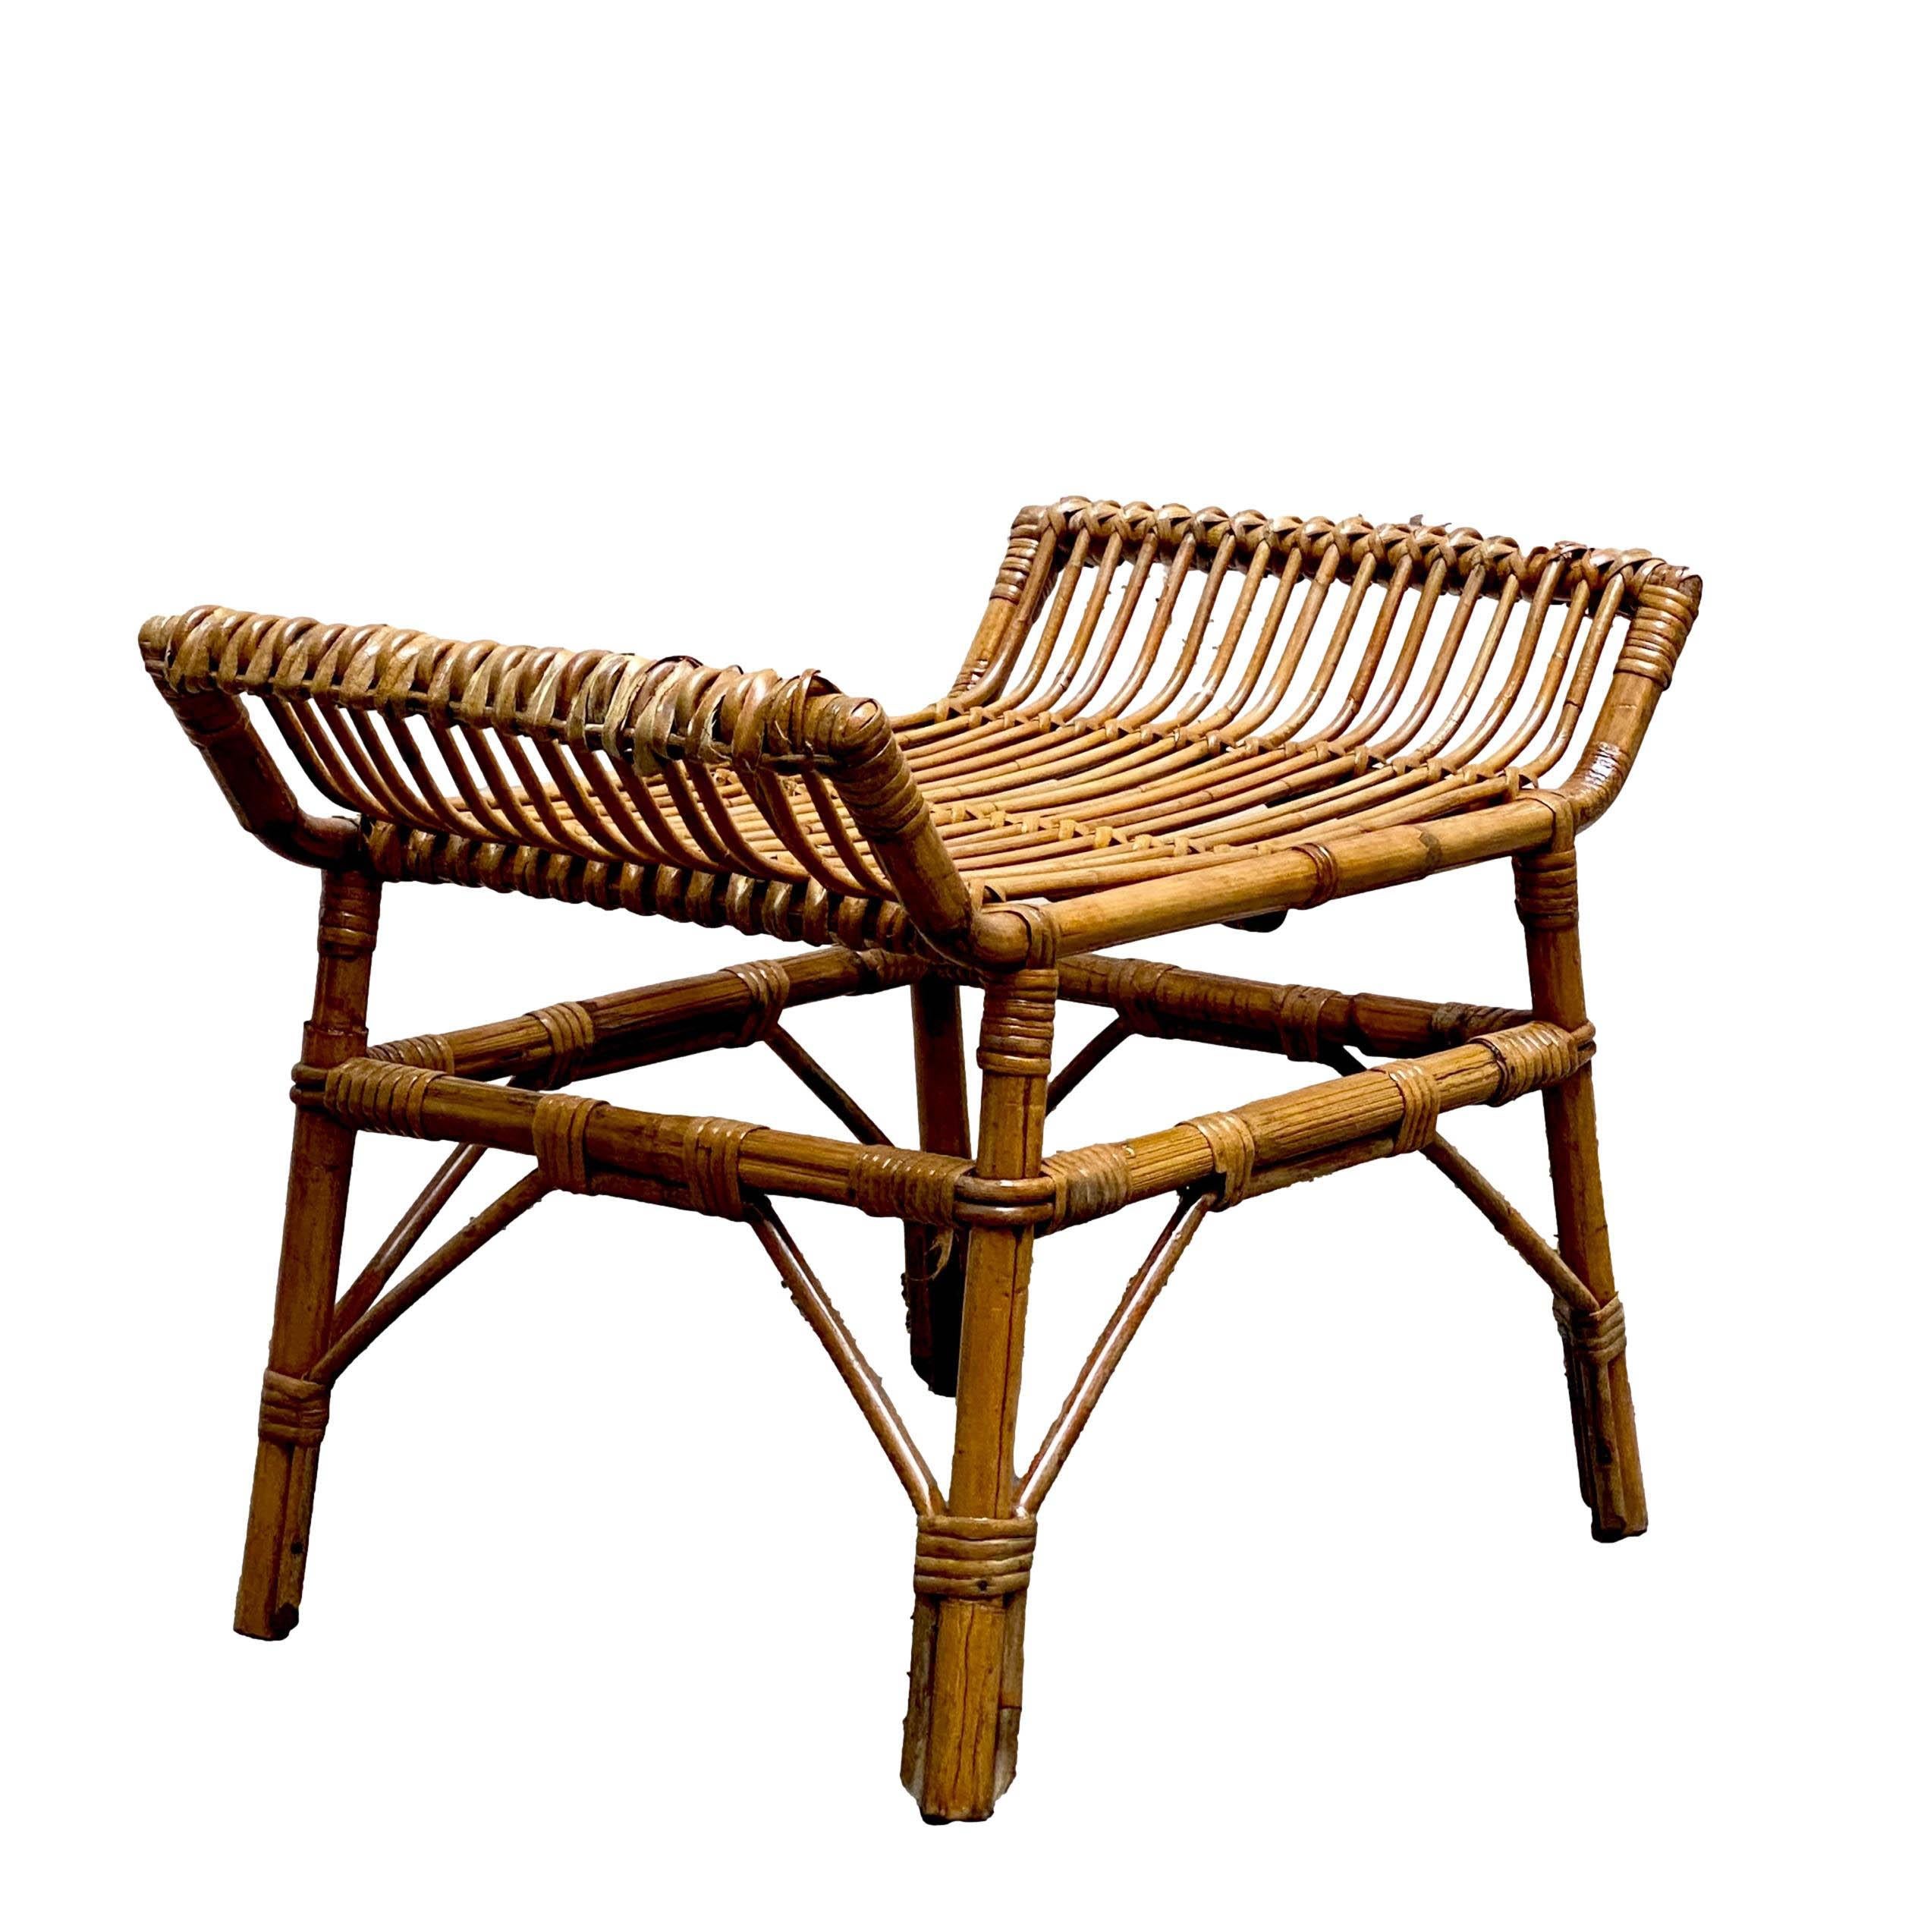 Beautiful 1960's bench perfect in any entrance hallway as well as next to a sofa or in any bathroom. This charming piece is in the typical Audoux and Minet style where the organic beauty of woven materials is timeless and classic, making bamboo and